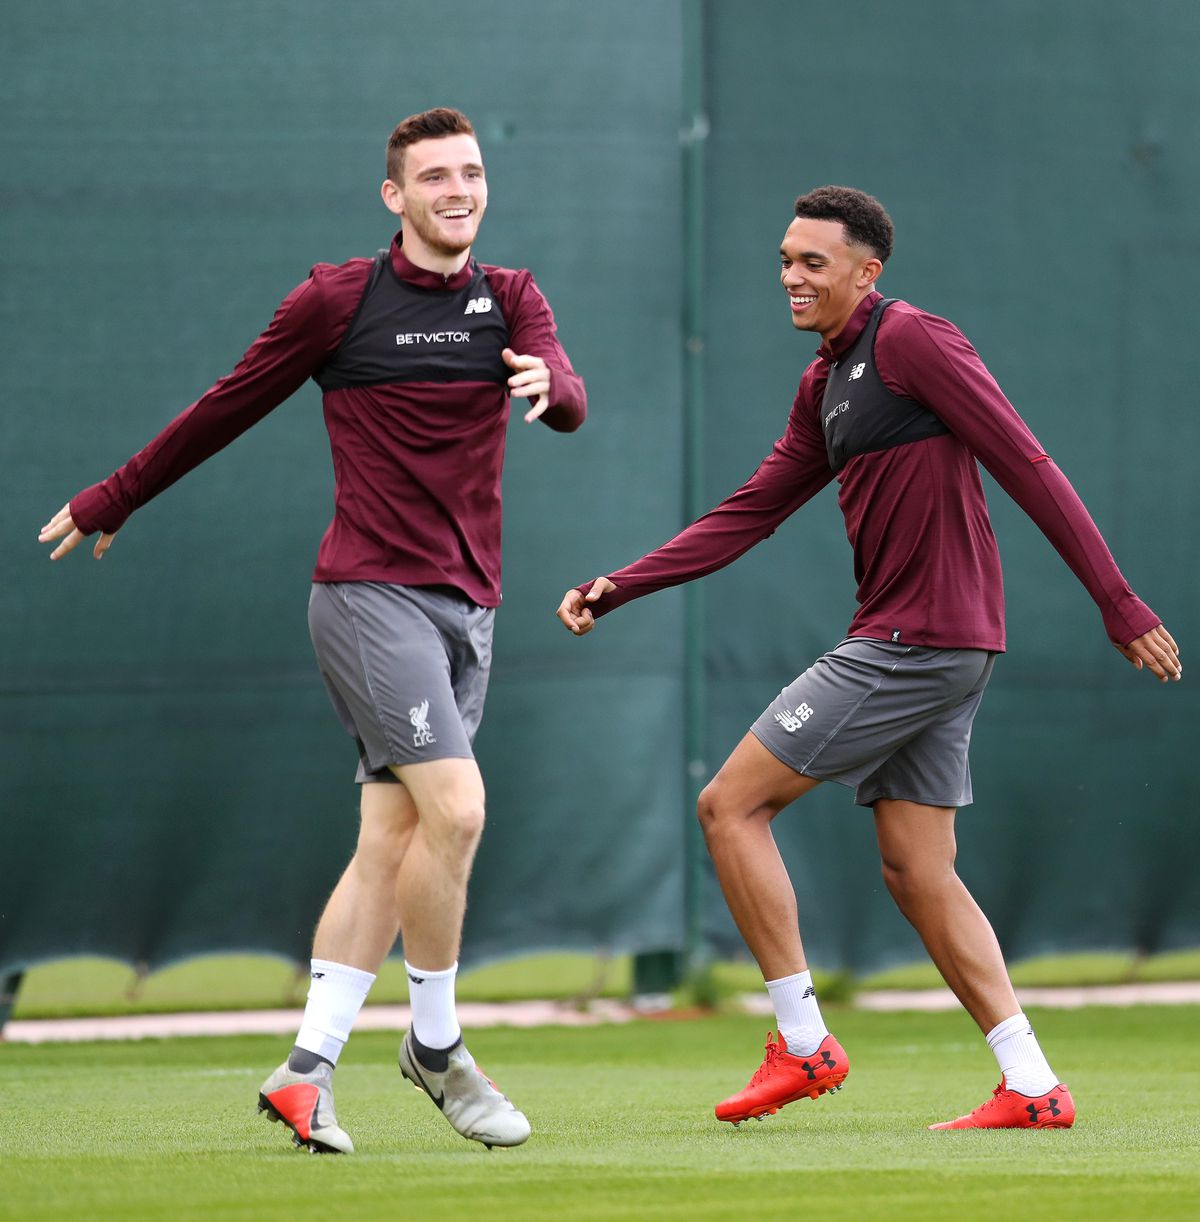 Andy Robertson and Trent Alexander-Arnold - Liverpool - UEFA Champions League